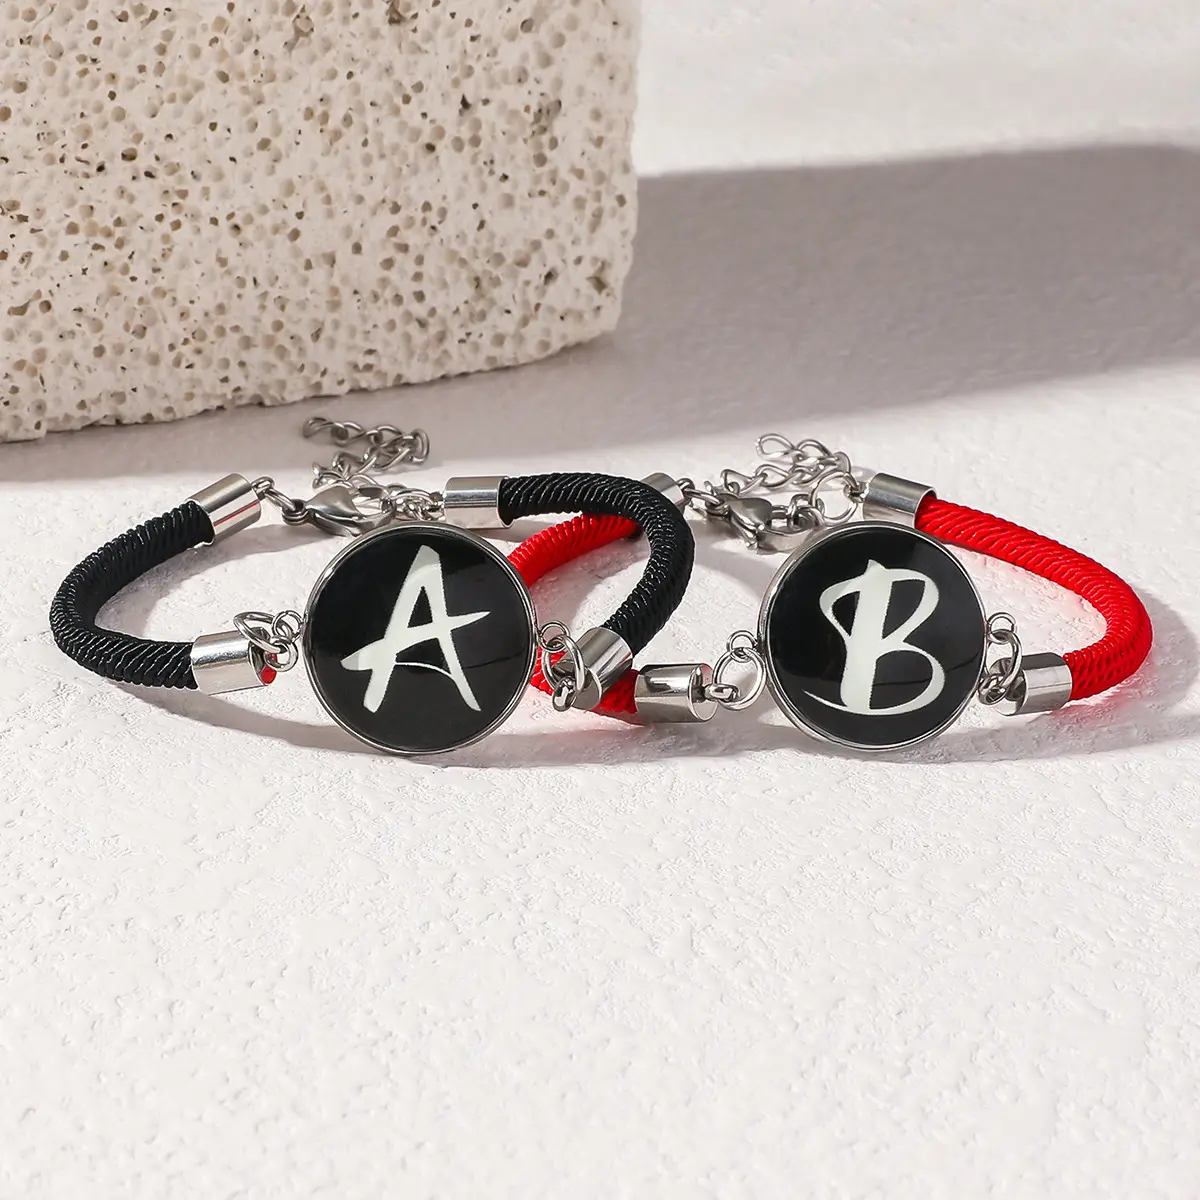 New Stainless Steel Luminous Couple Bracelet Rope 26 English Letters Bracelets For Jewelry Gifts